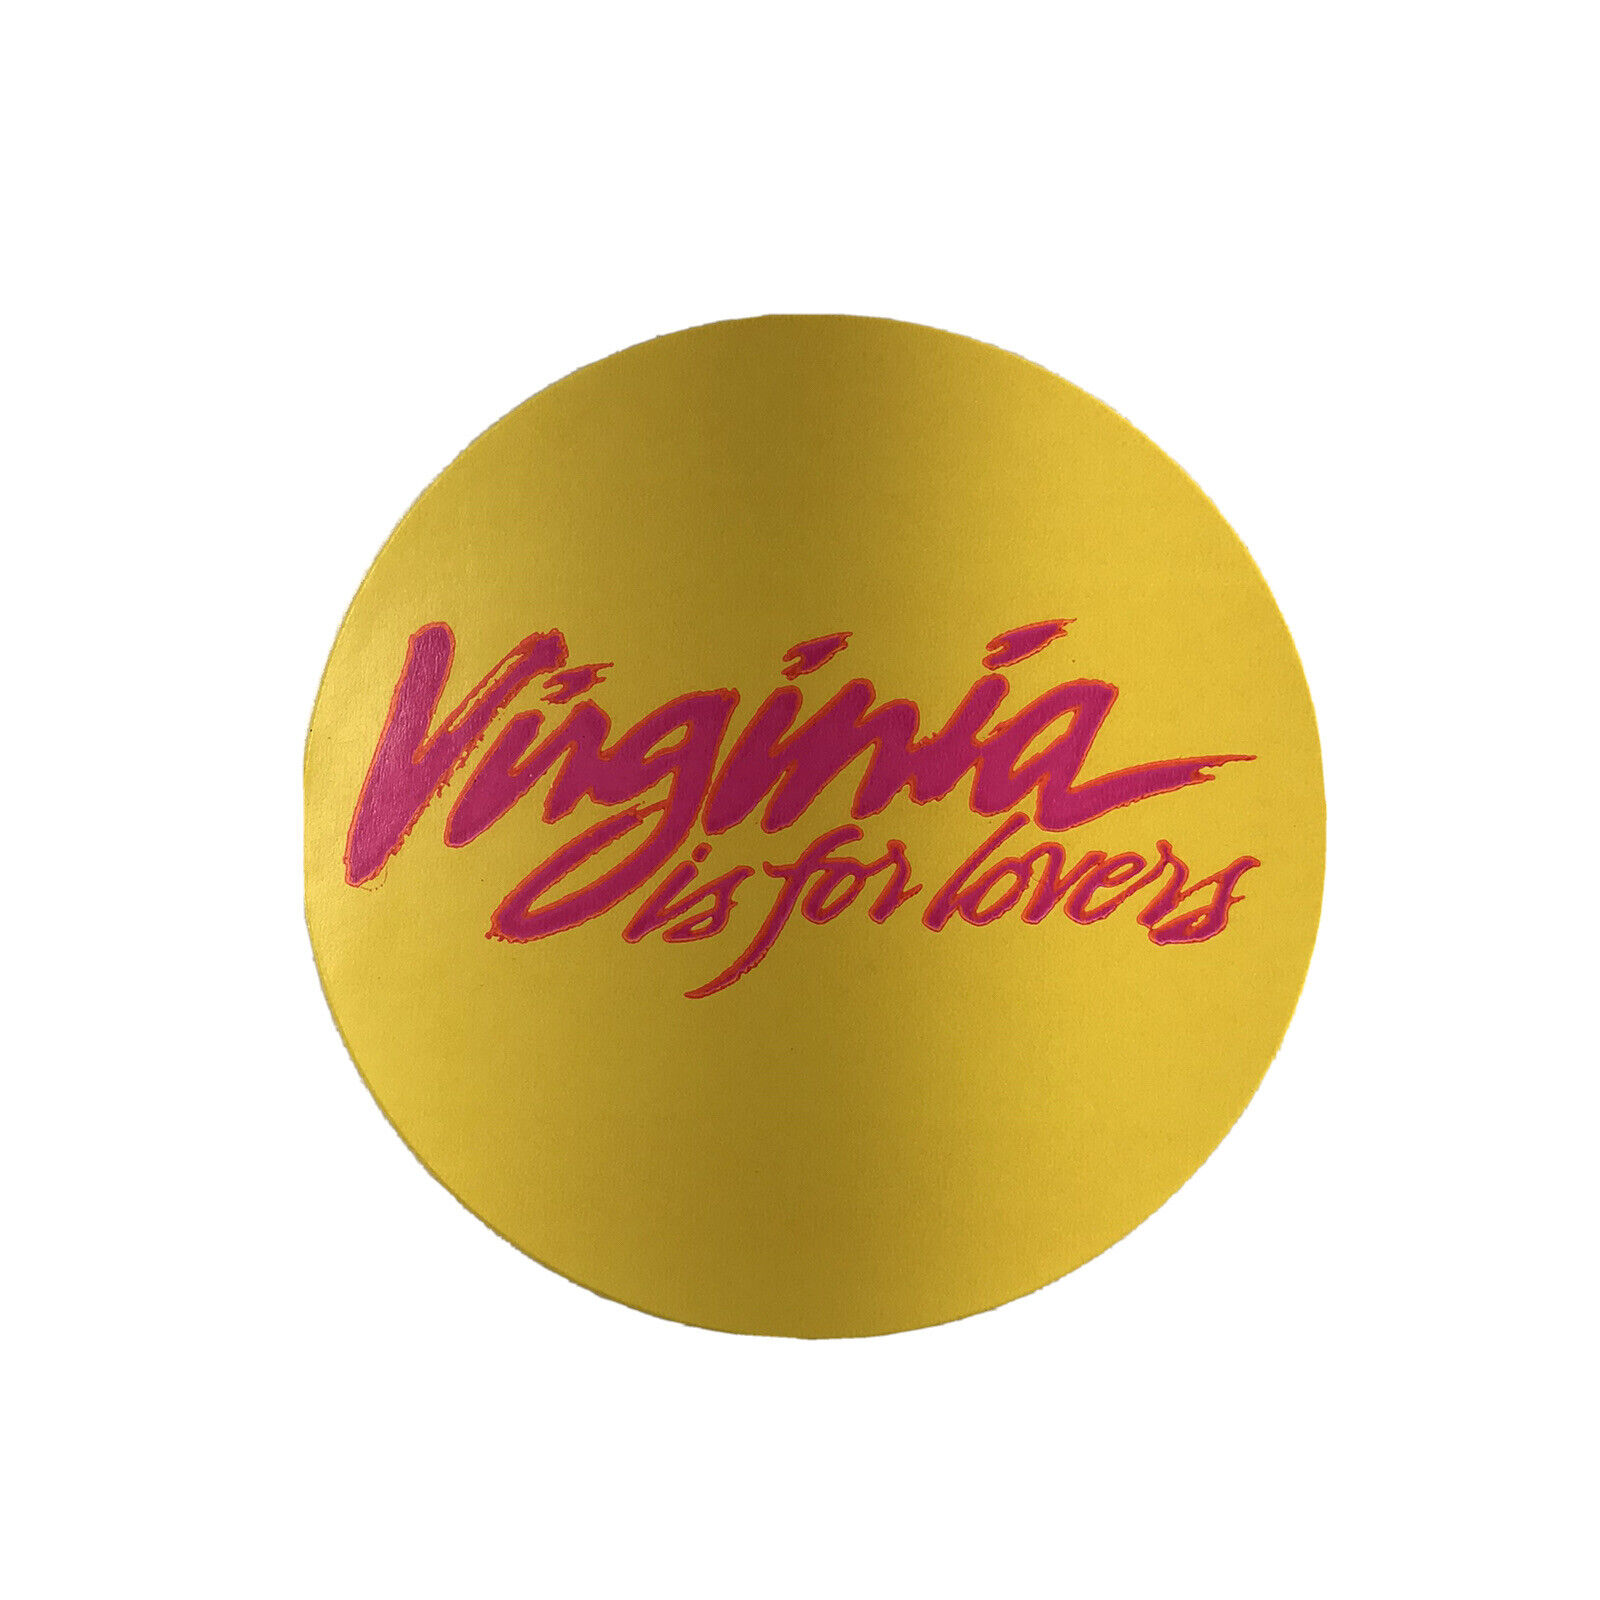 Virginia Is For Lovers Vintage Sticker 1990s